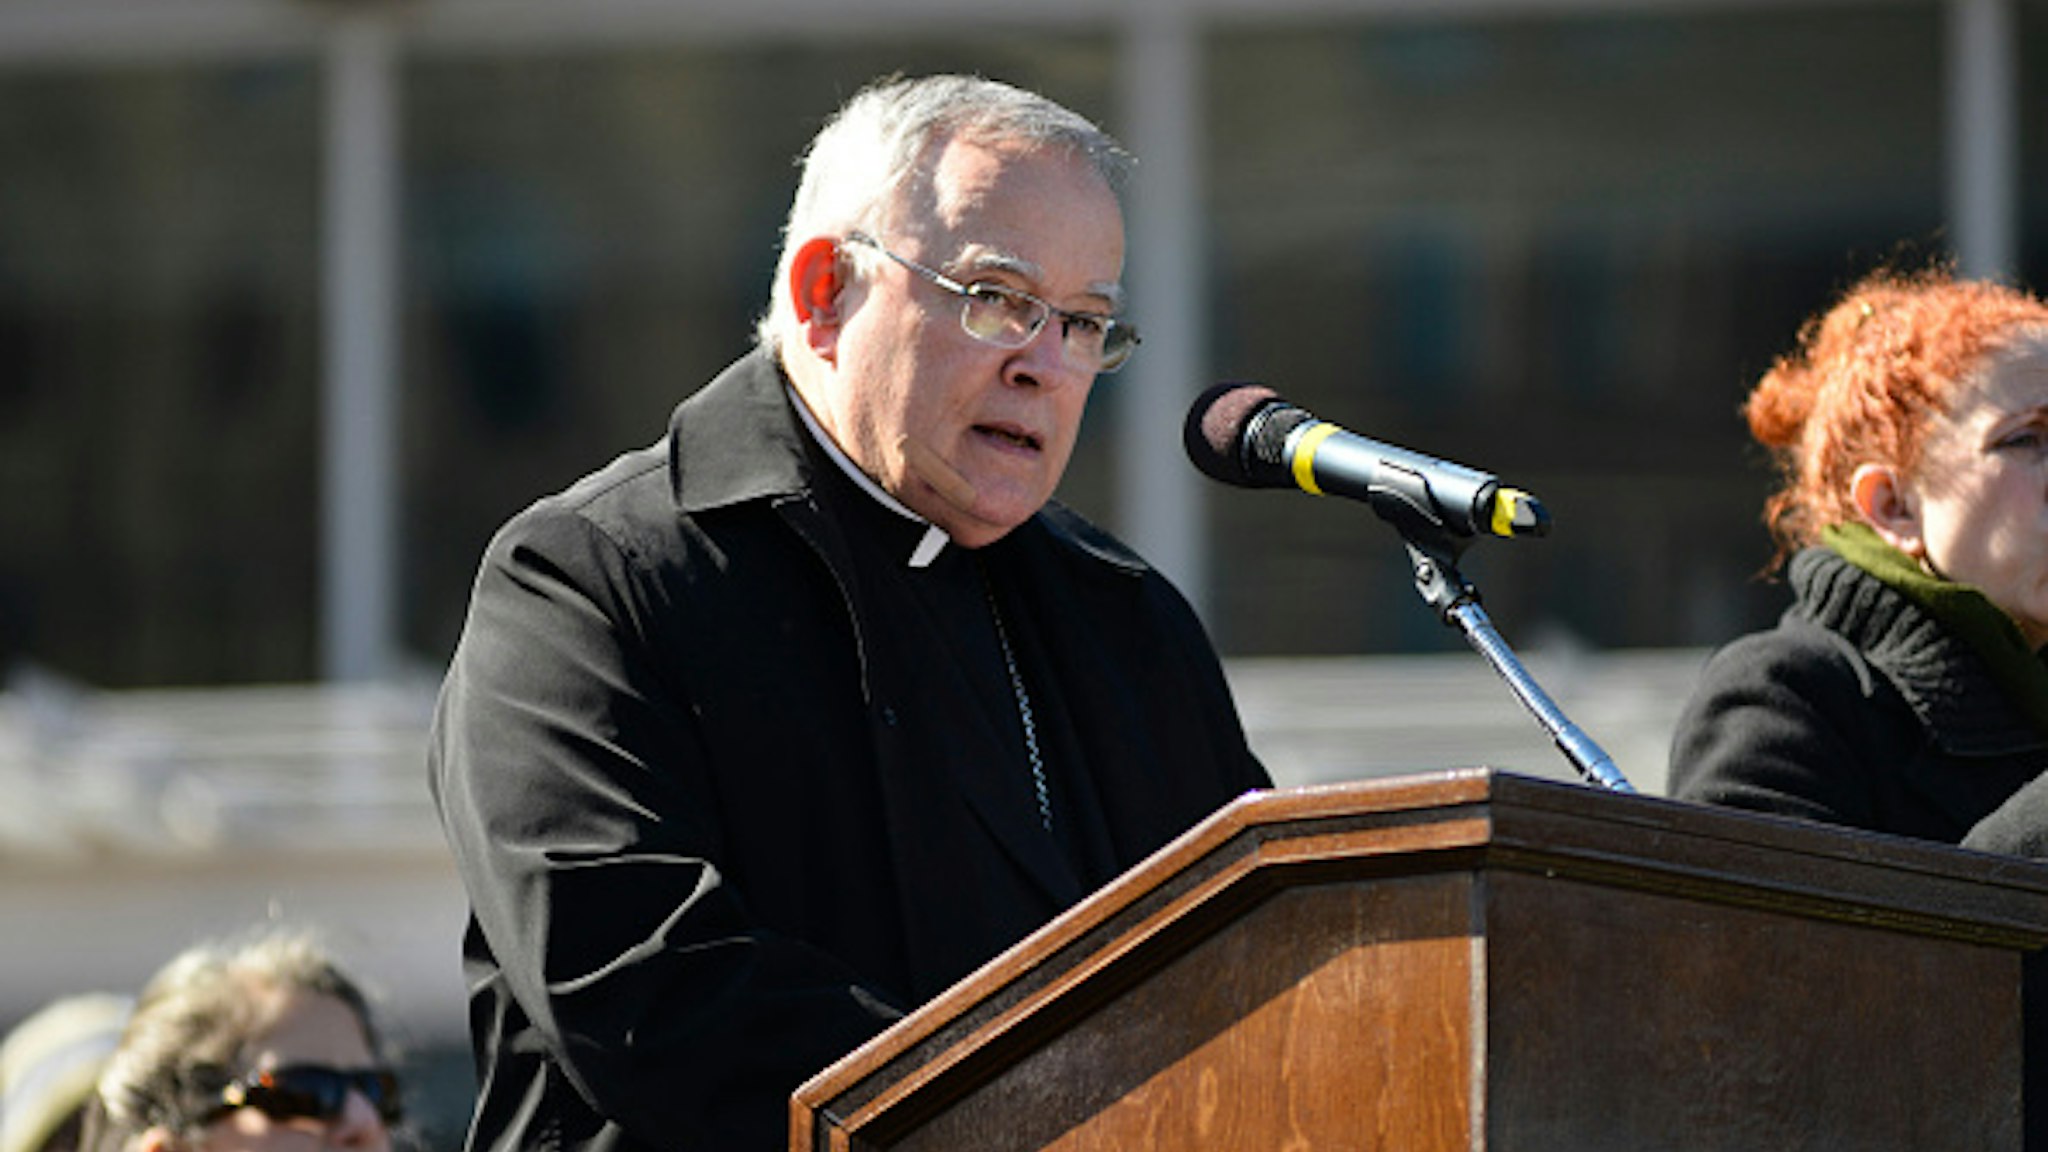 Archbishop Charles Chaput (left) is seen on stage as Interfaith Church and Community leaders are joined by local elected officials at a March 2, 2017 Stand Against Hate rally at Independence Mall in Philadelphia, PA.